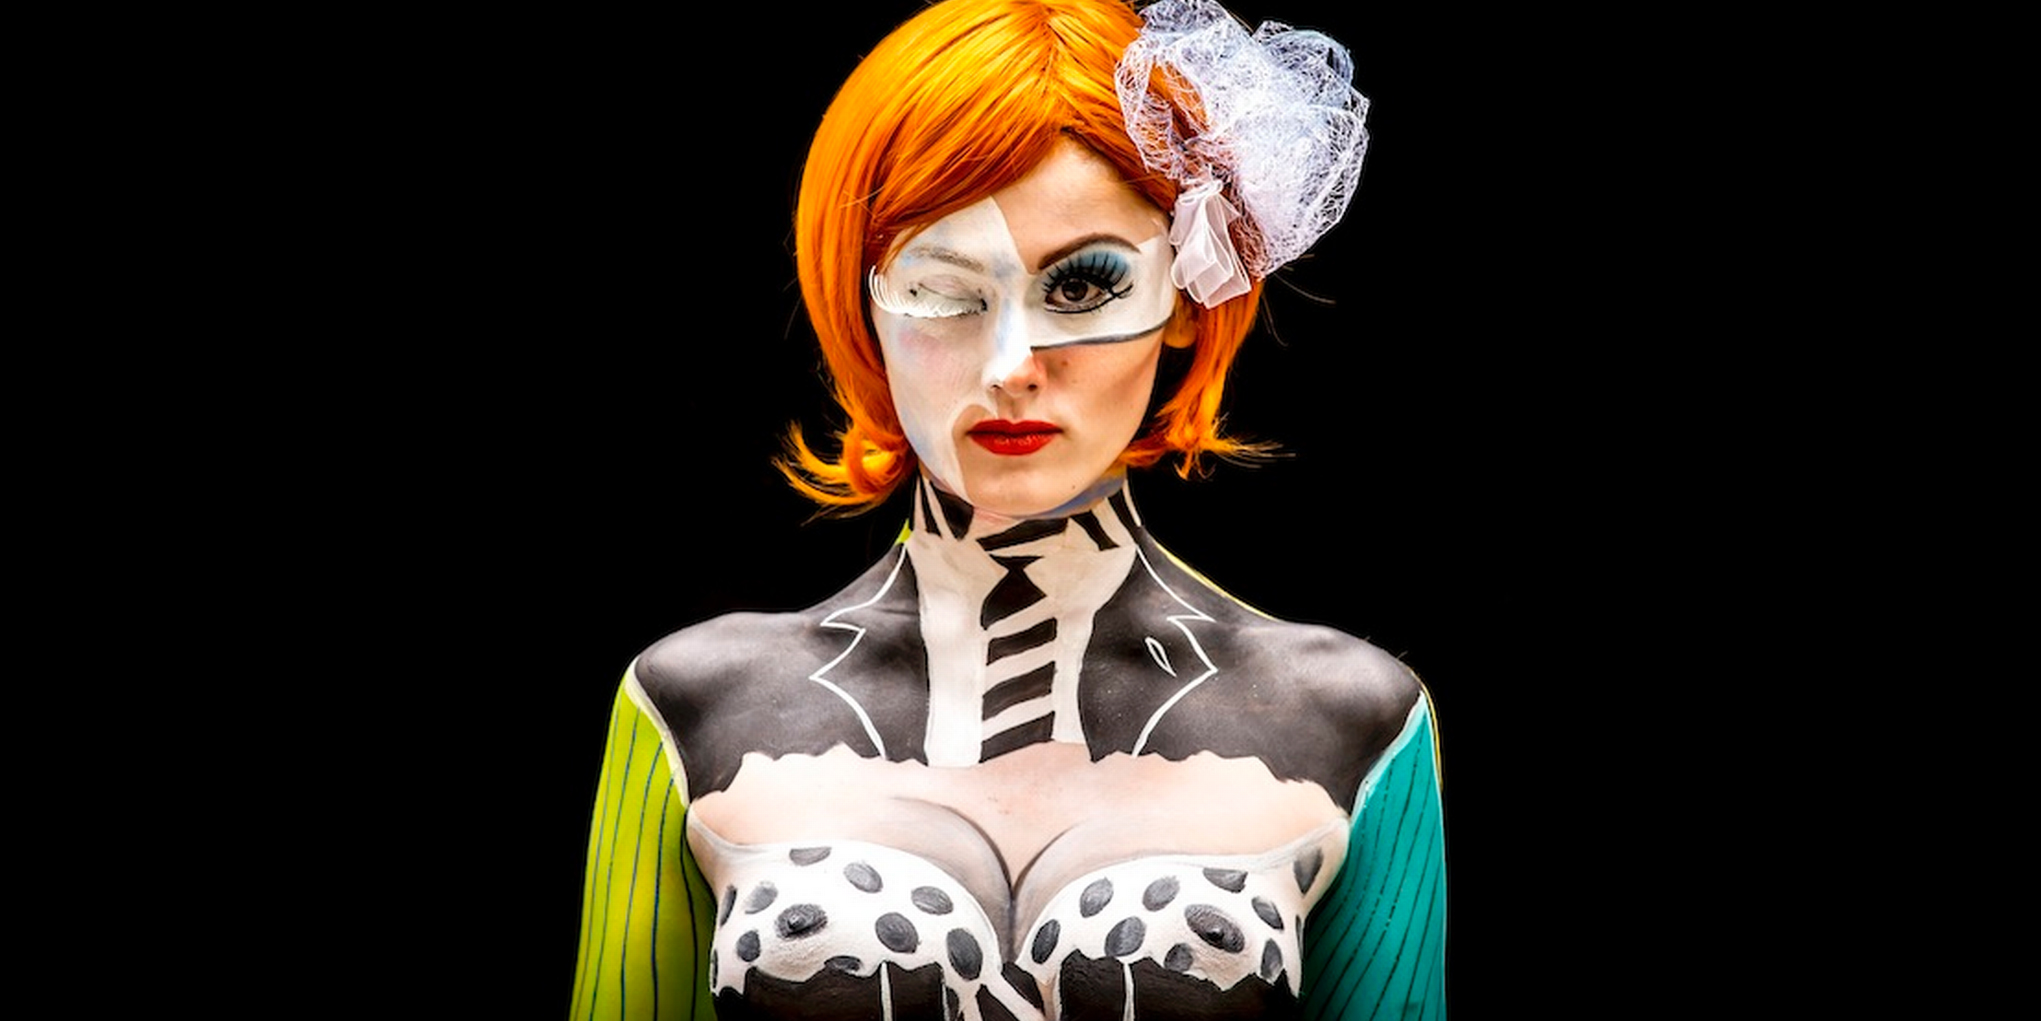 The World Bodypainting Festival: Vibrant Colours. Quirky Costumes. Incredible Art. Partial Nudity.